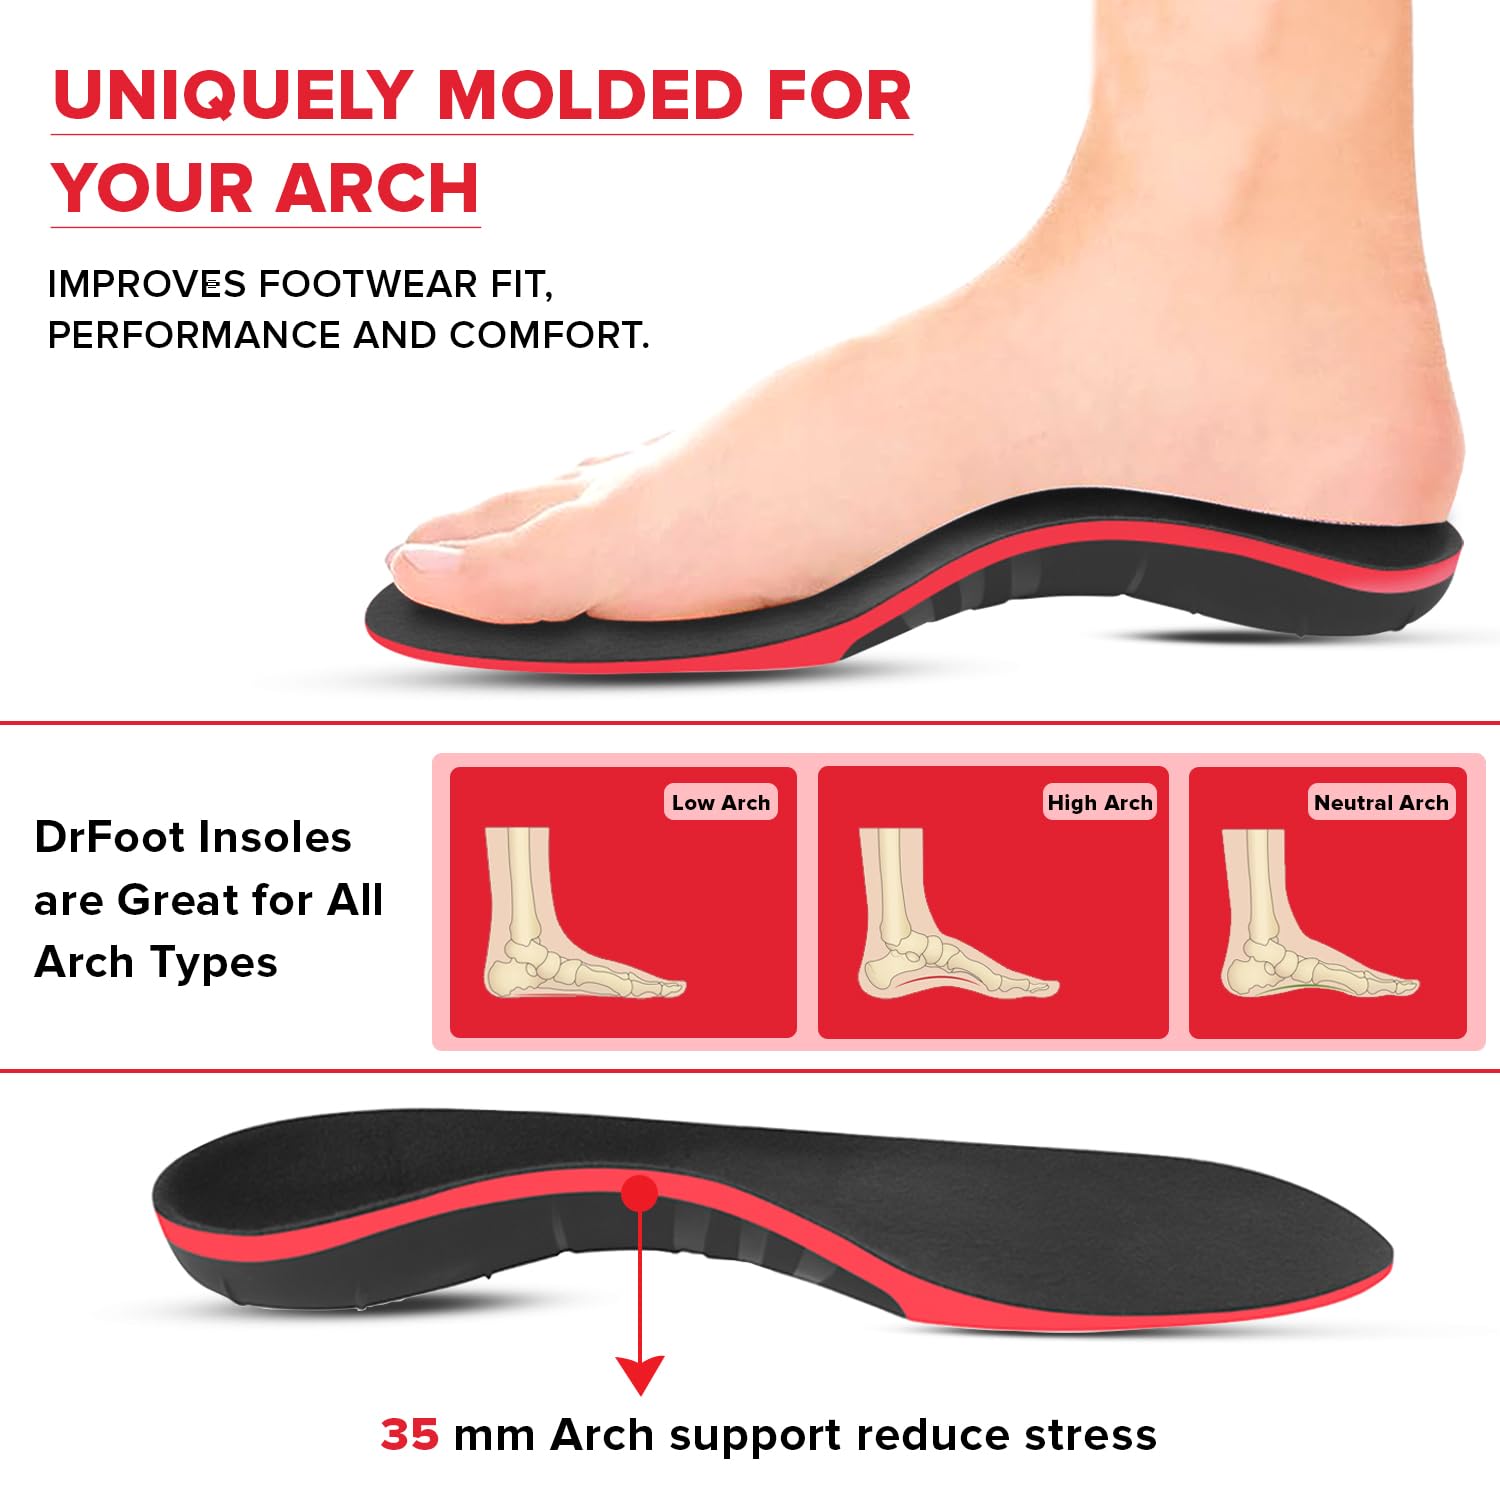 Dr Foot High Arch Support Insoles | Shoe Inserts For Plantar Fasciitis, Flat Feet, Feet Pain, Heel Spur Pain |For All Day Comfort & Support & Shock Absorption | For Men and Women -1 Pair (Large Size)